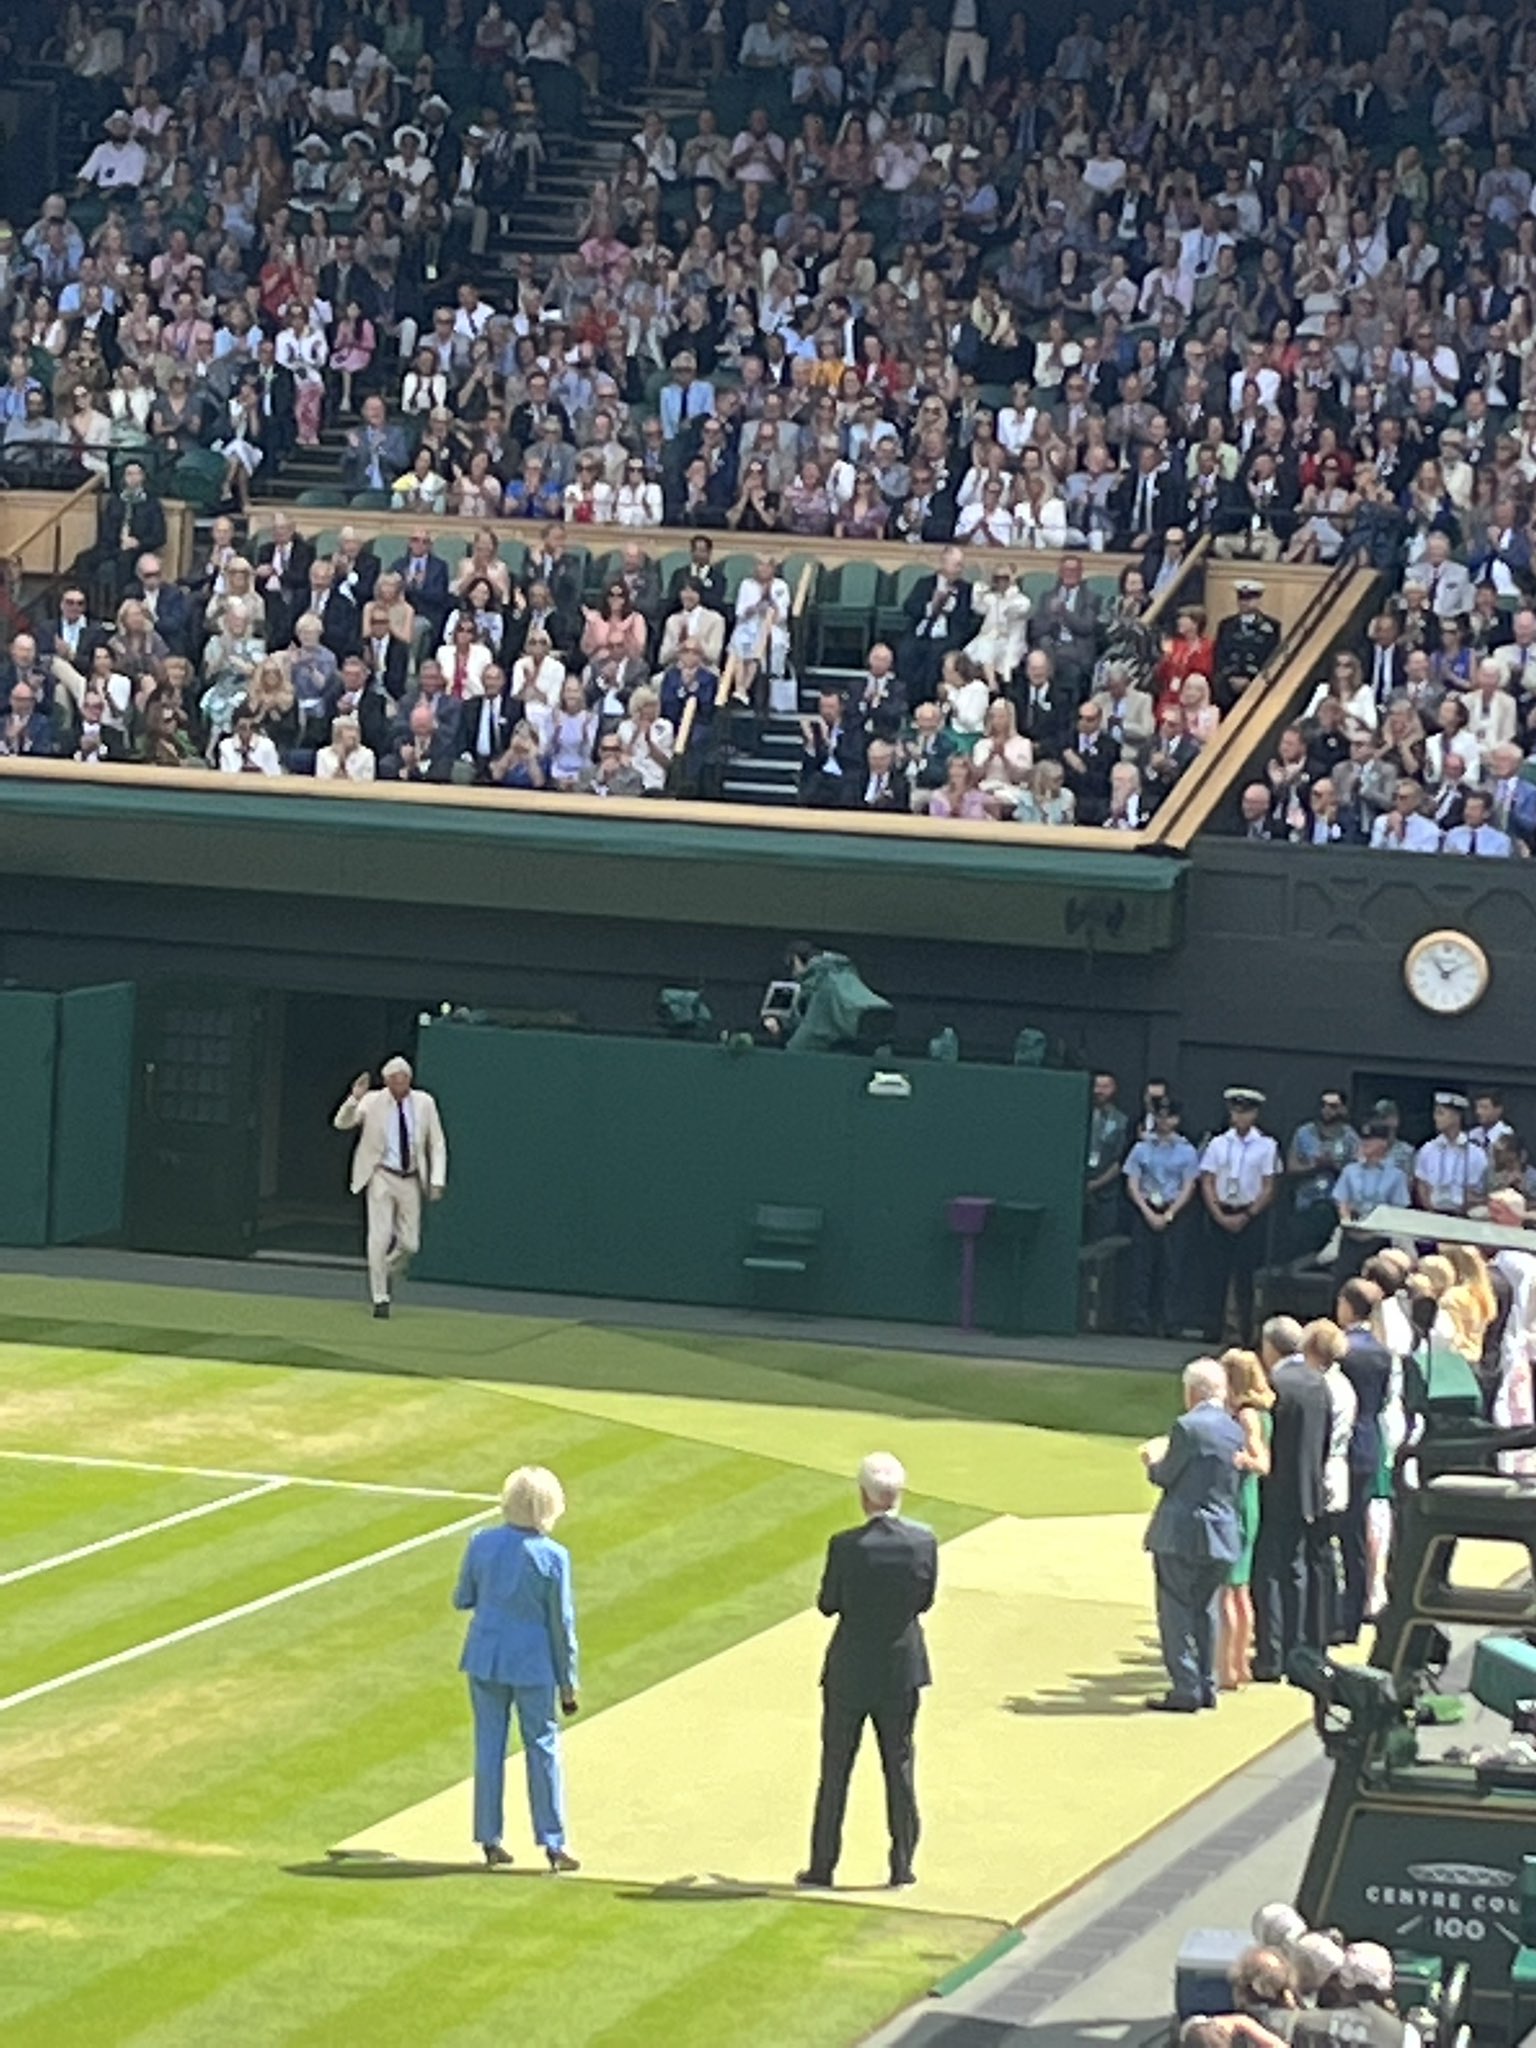 Depressie eerlijk aanpassen Sean Ingle on Twitter: "Bjorn Borg introduced to the Wimbledon crowd as  part of the Champions parade. Definitely the nosiest and busiest Centre  Court has been all week https://t.co/Bu8PNQKBdR" / Twitter